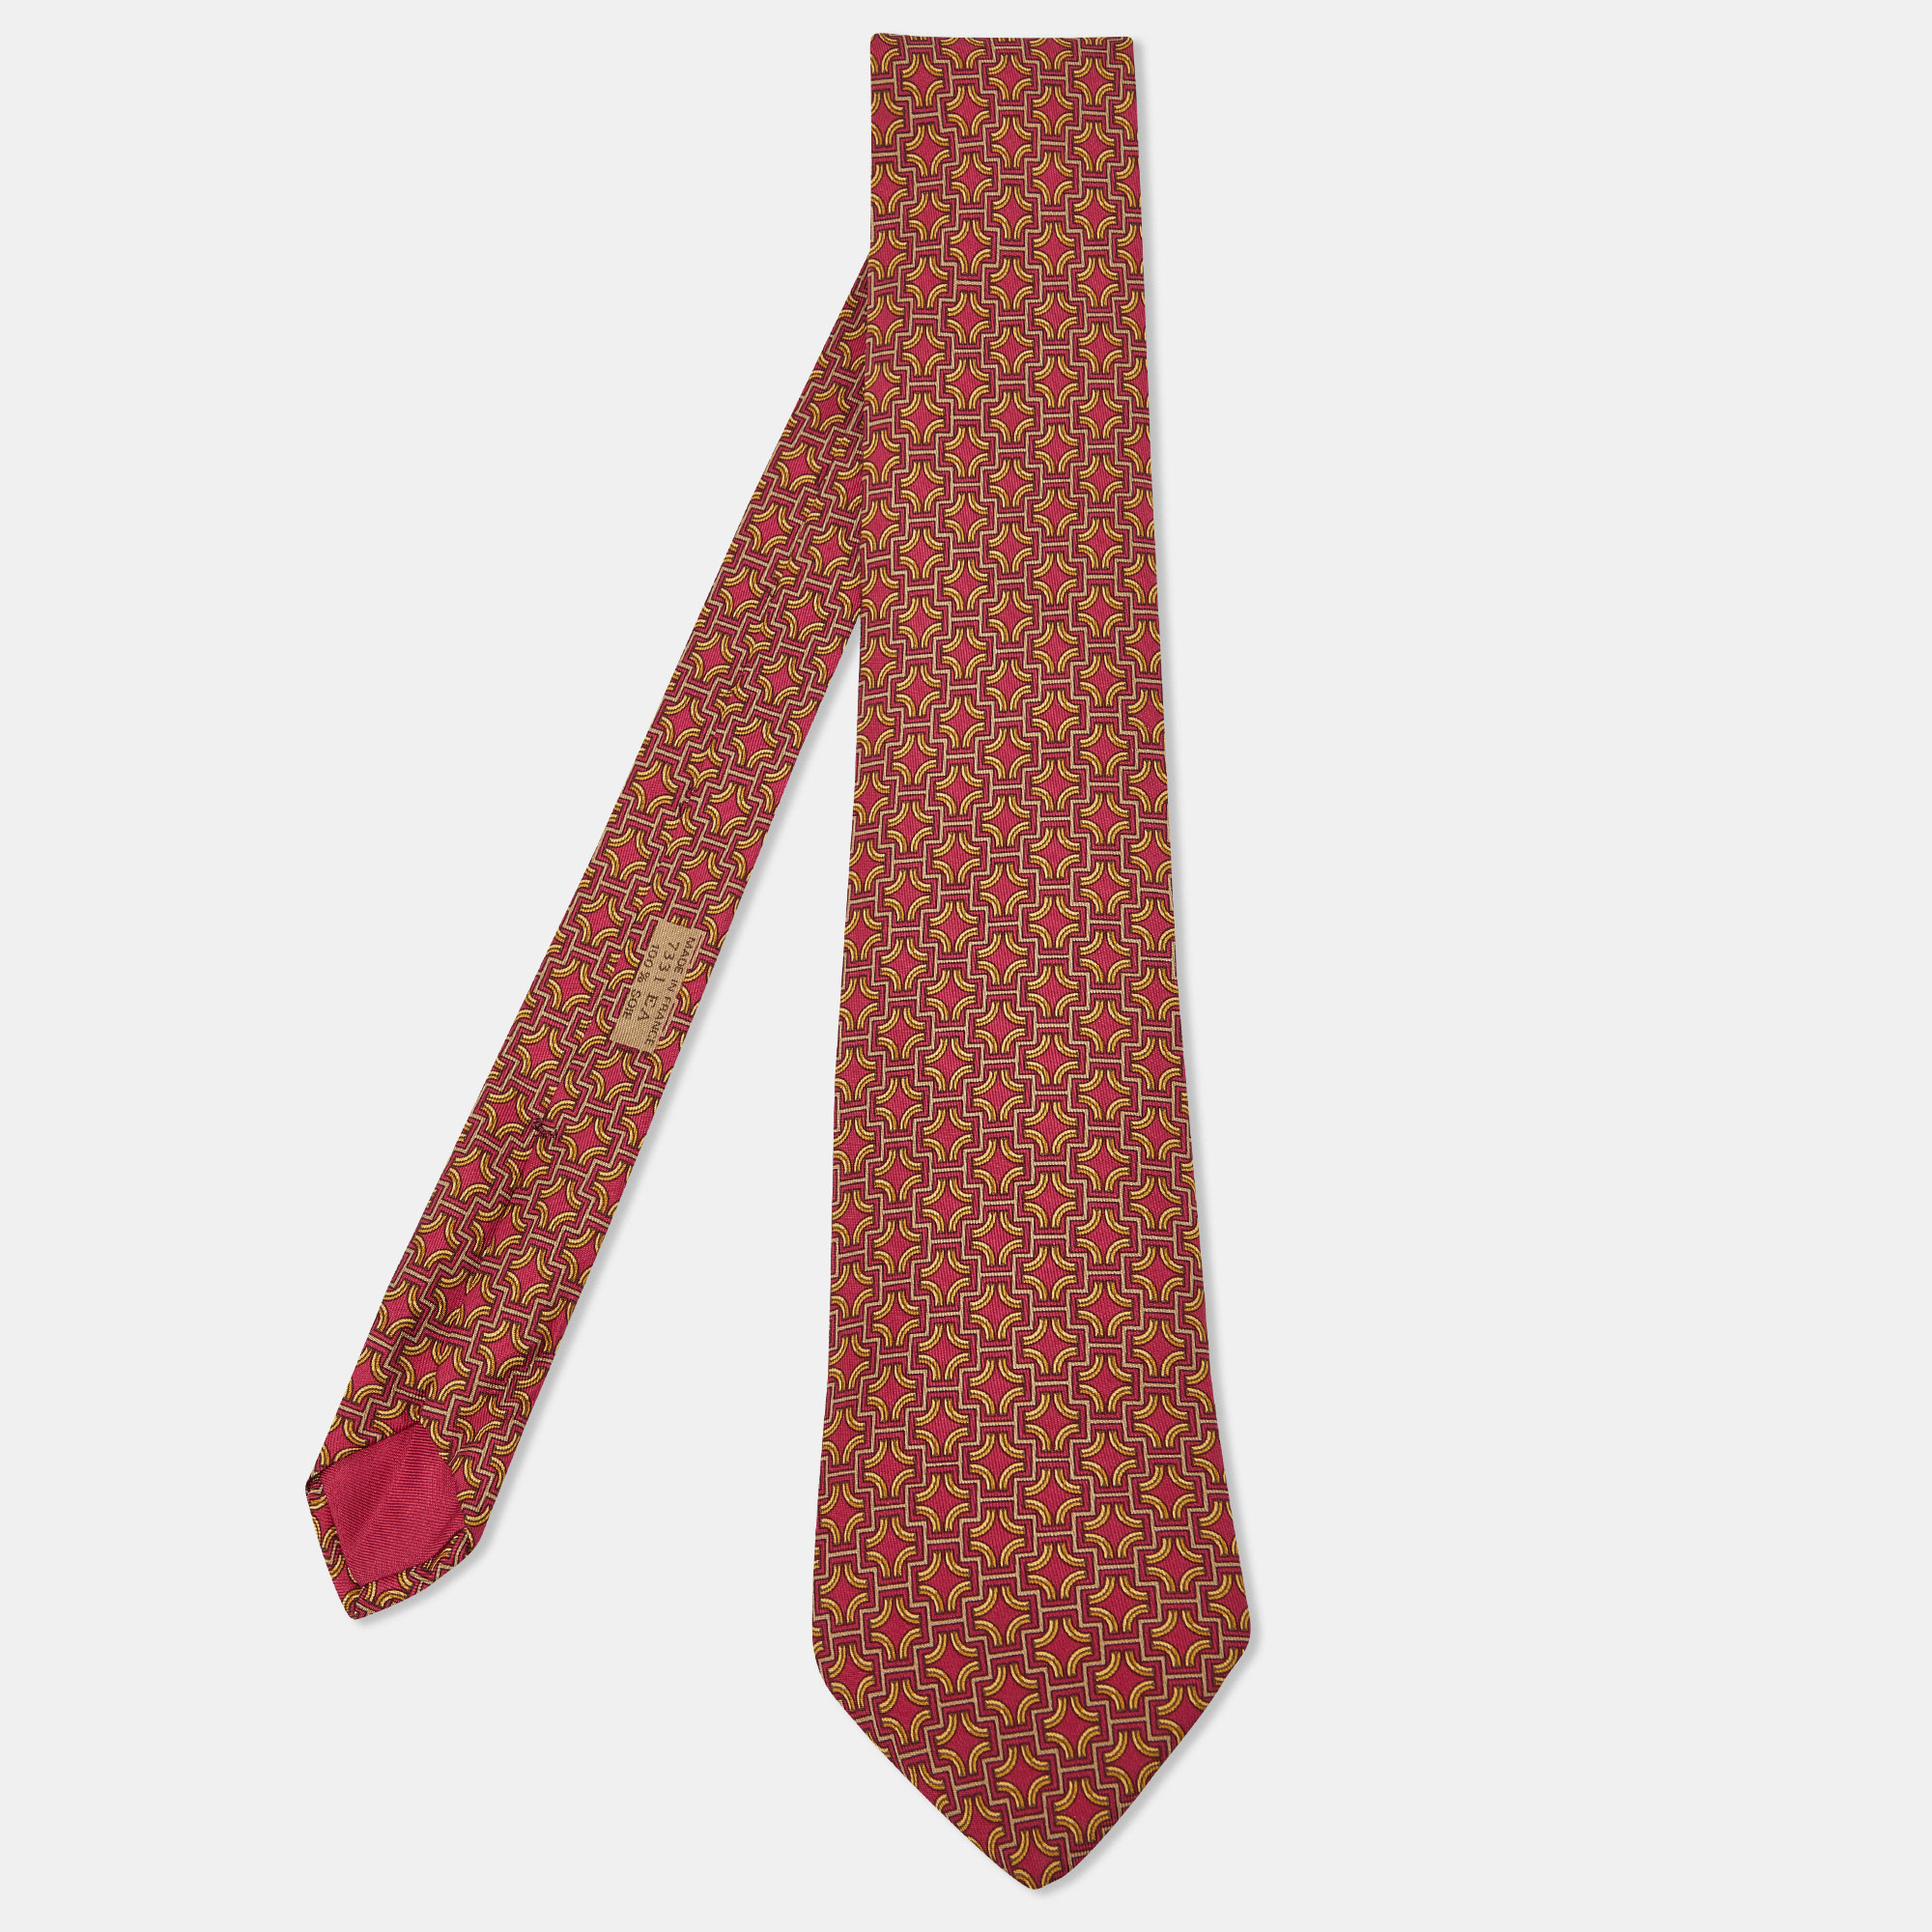 Made in France using 100% silk this Hermes tie for men has patterns printed all over. This finely tailored accessory will add a charming finish.